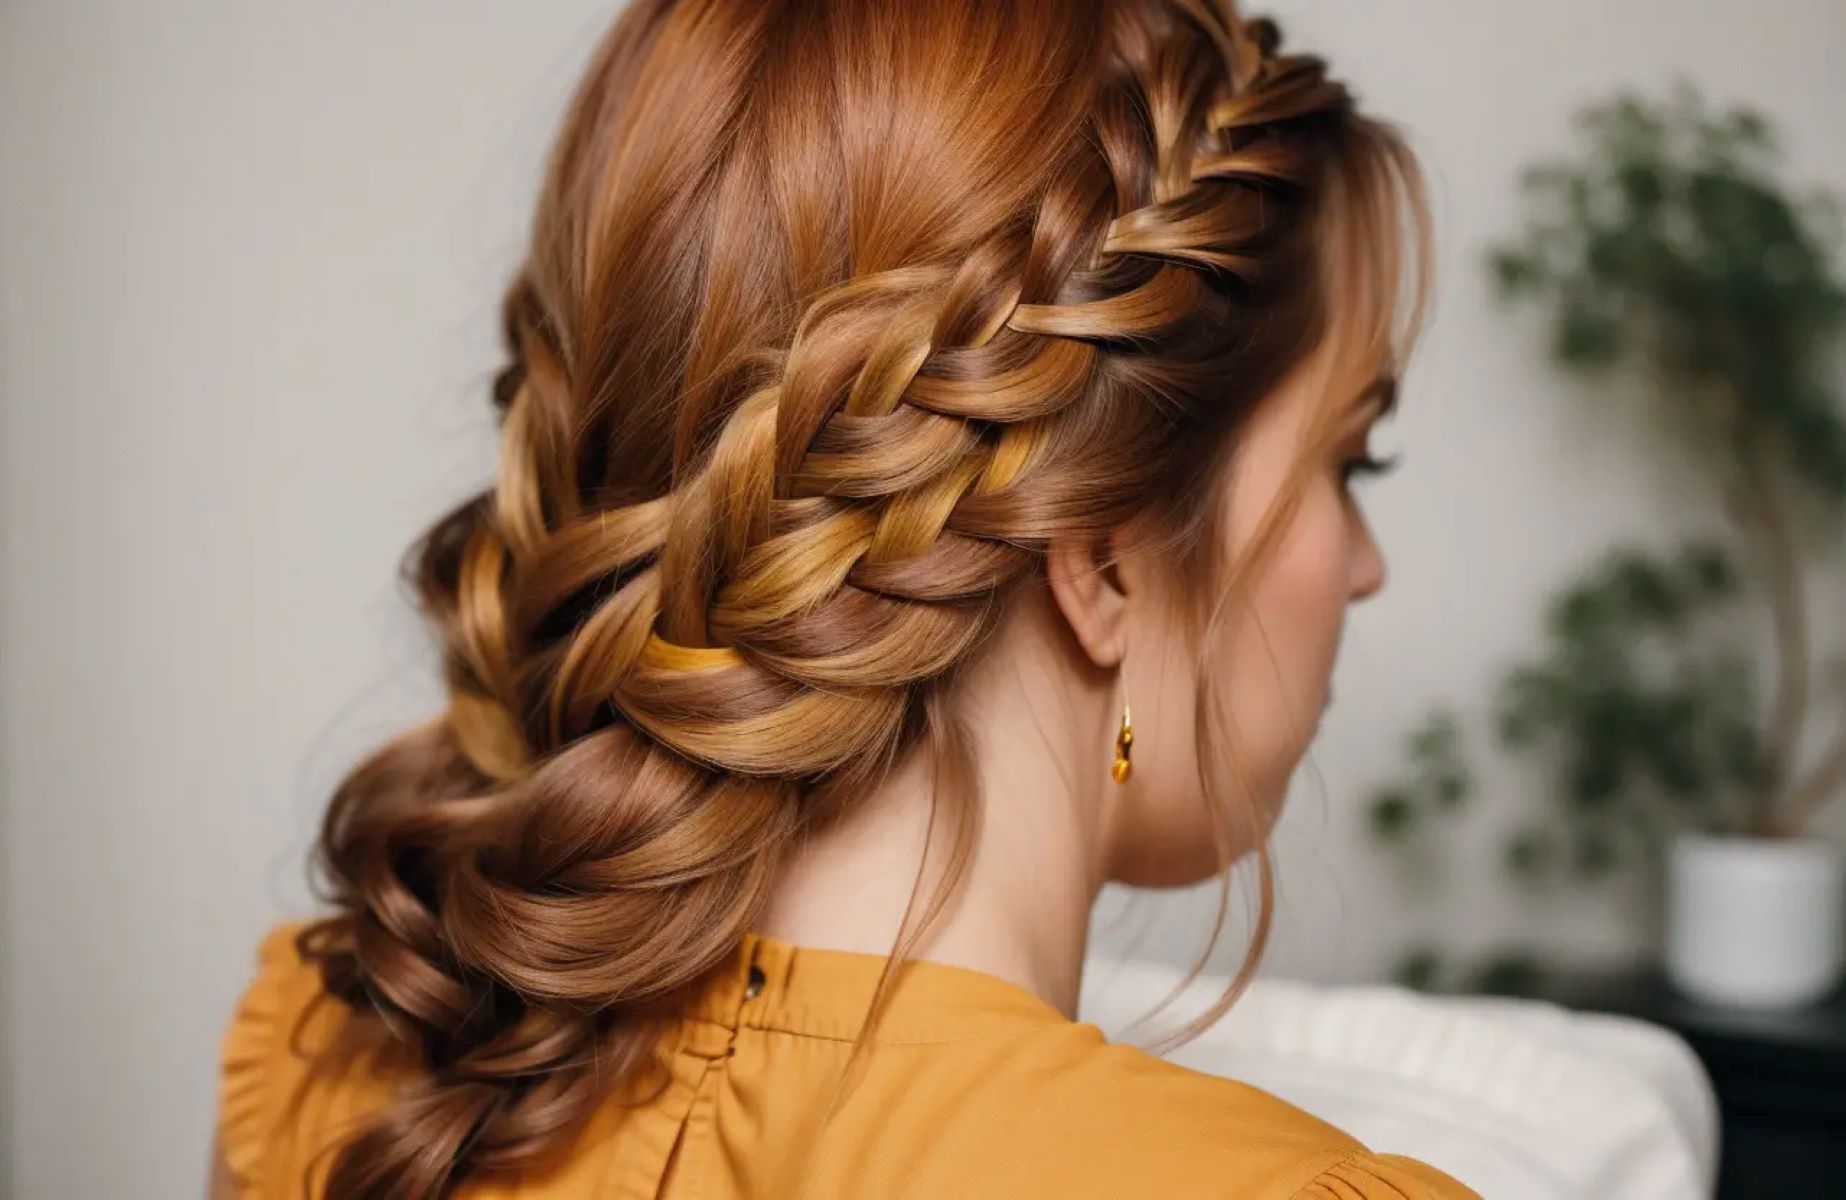 Get A Stunning French Braid At Your Local Salon - Affordable Prices And Expert Stylists!